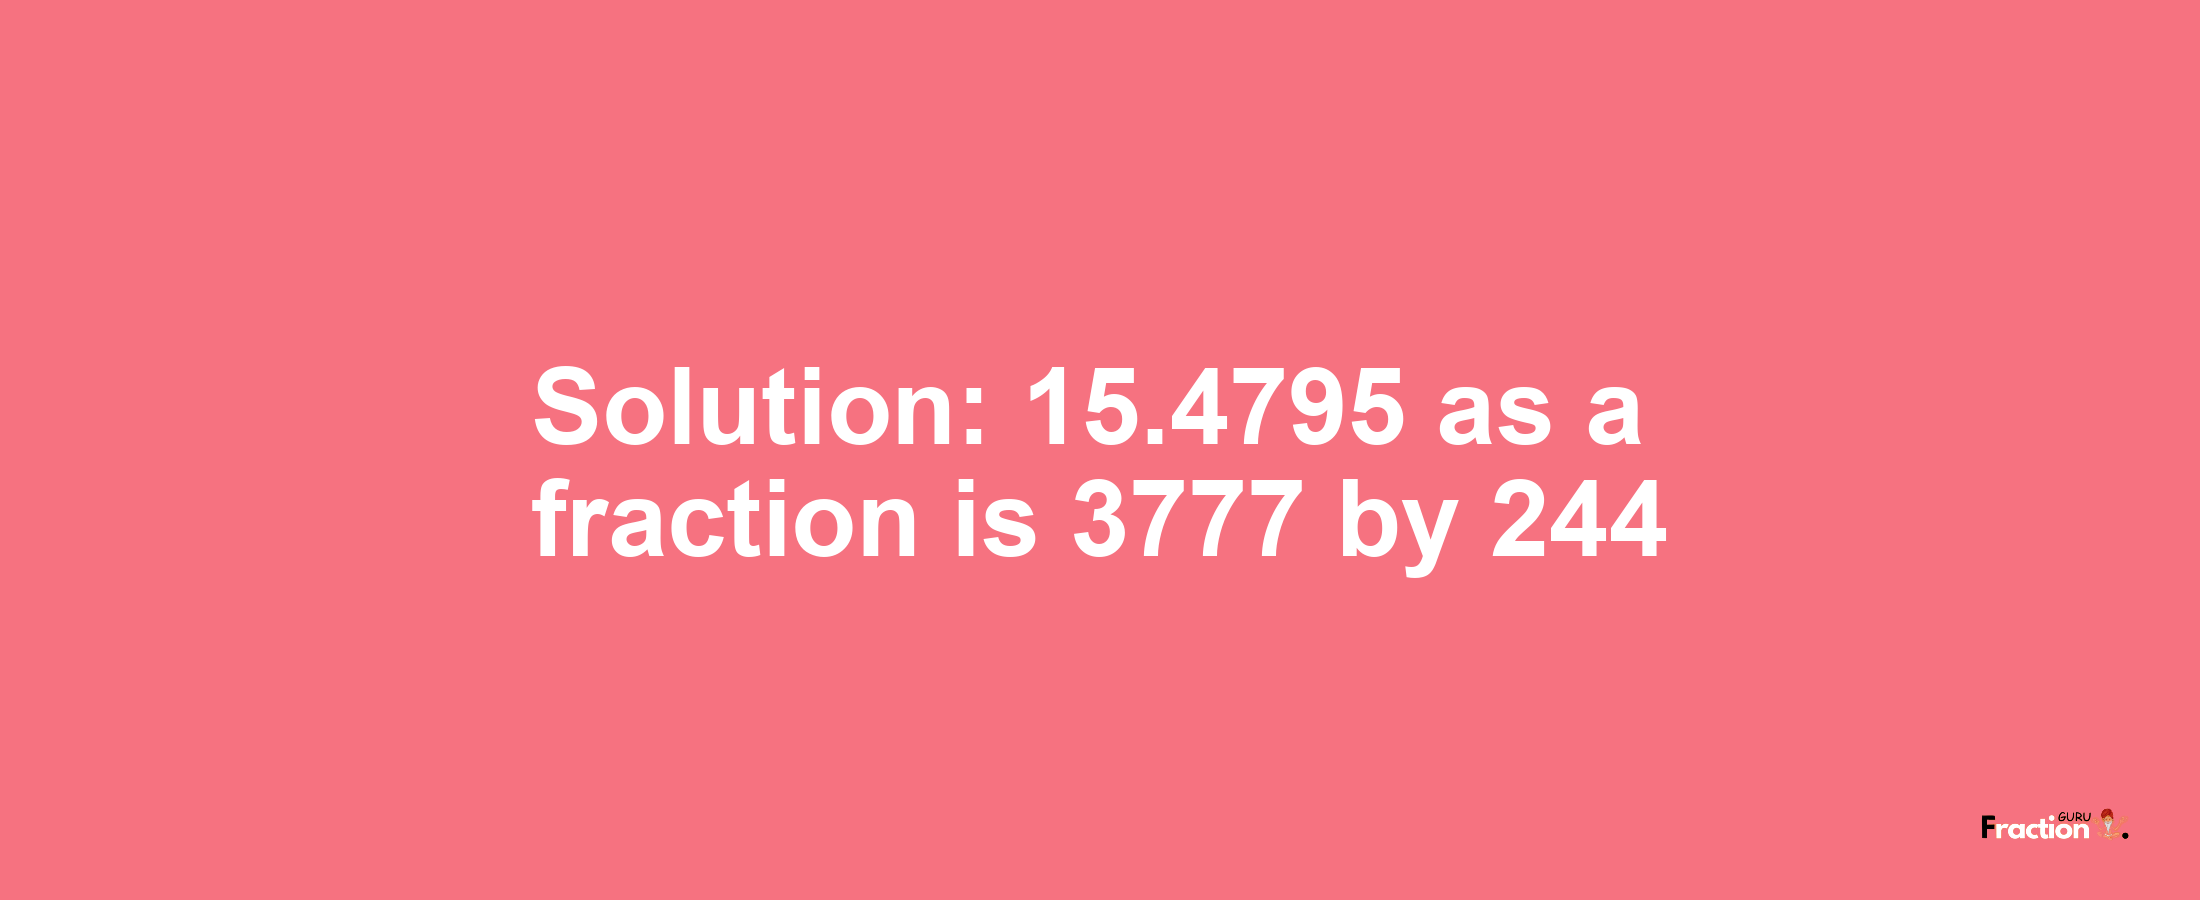 Solution:15.4795 as a fraction is 3777/244